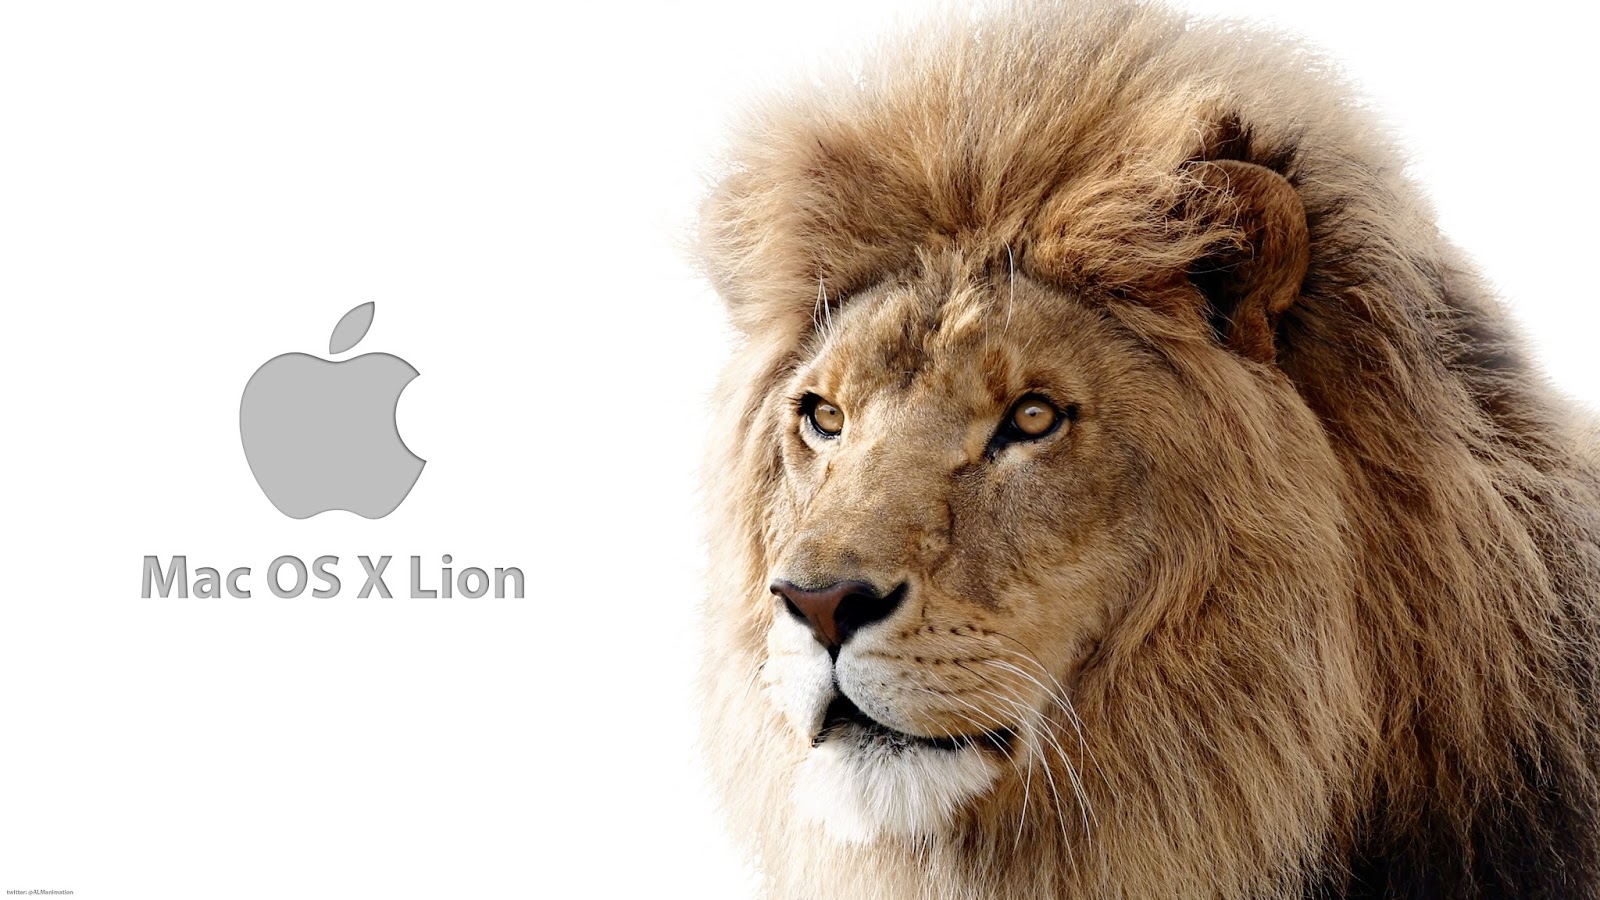 android emulator for mac os 10.7.5 lion